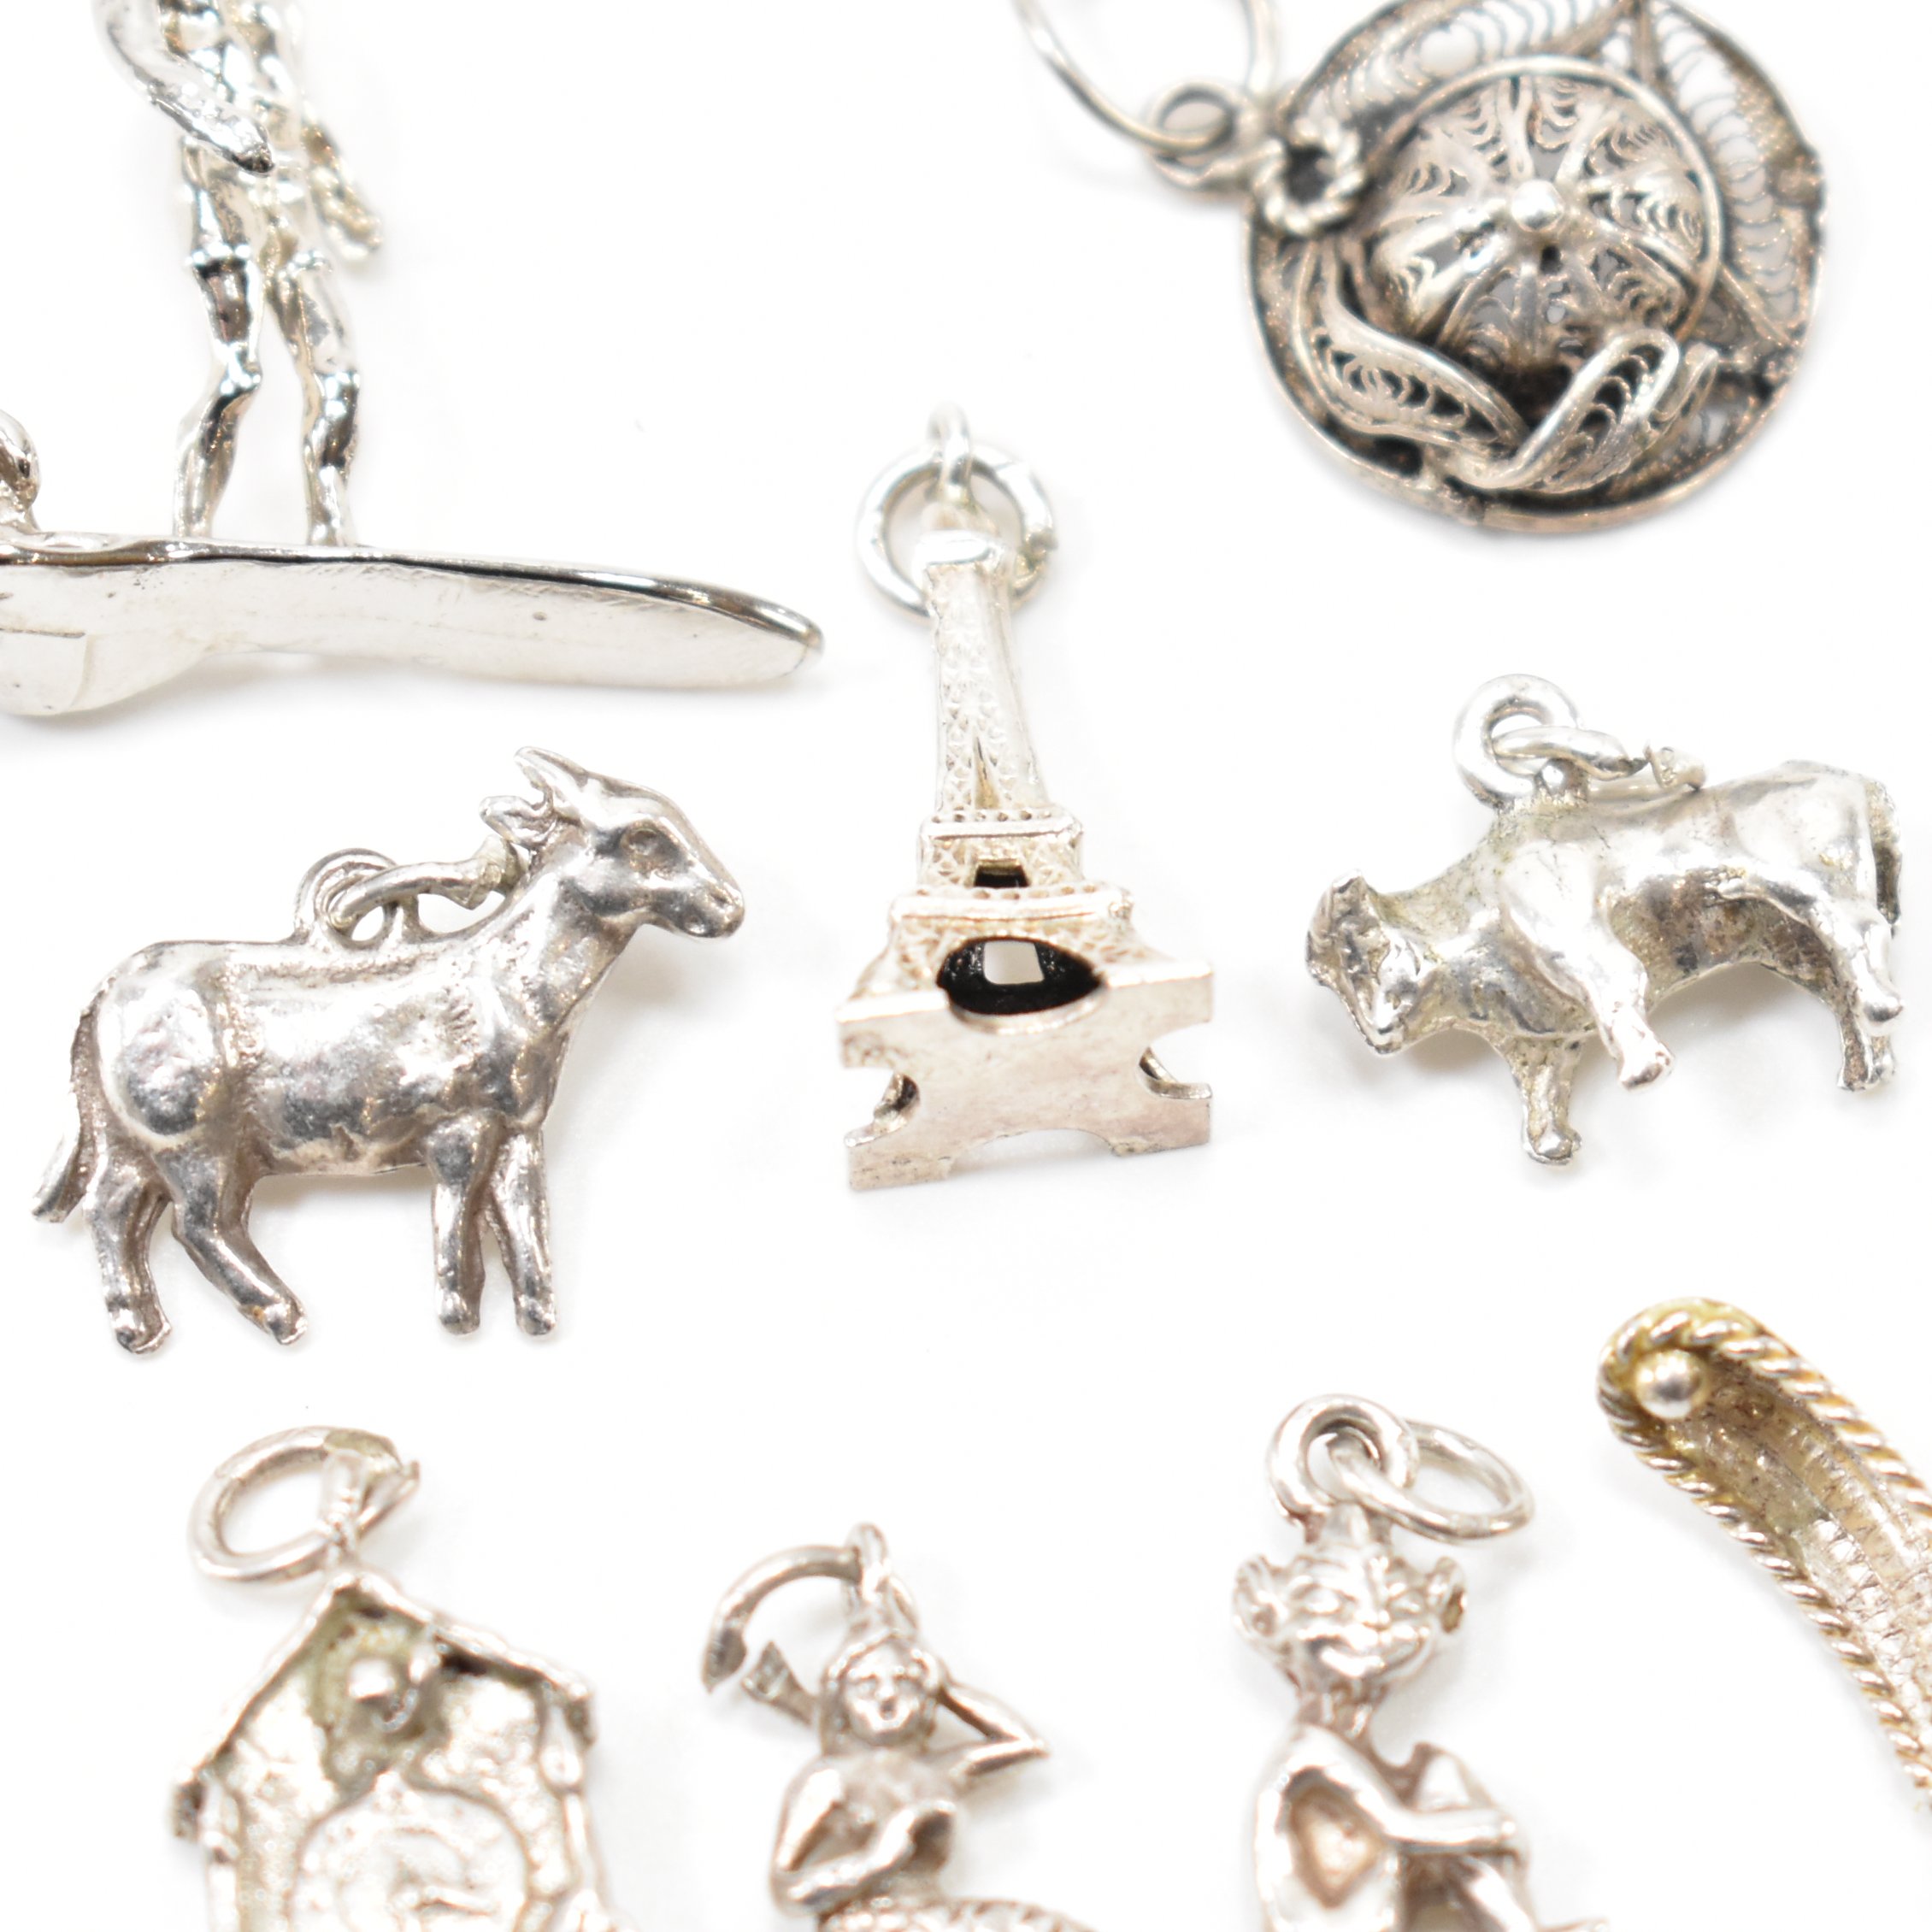 GROUP OF VINTAGE WHITE METAL CHARMS - Image 4 of 6